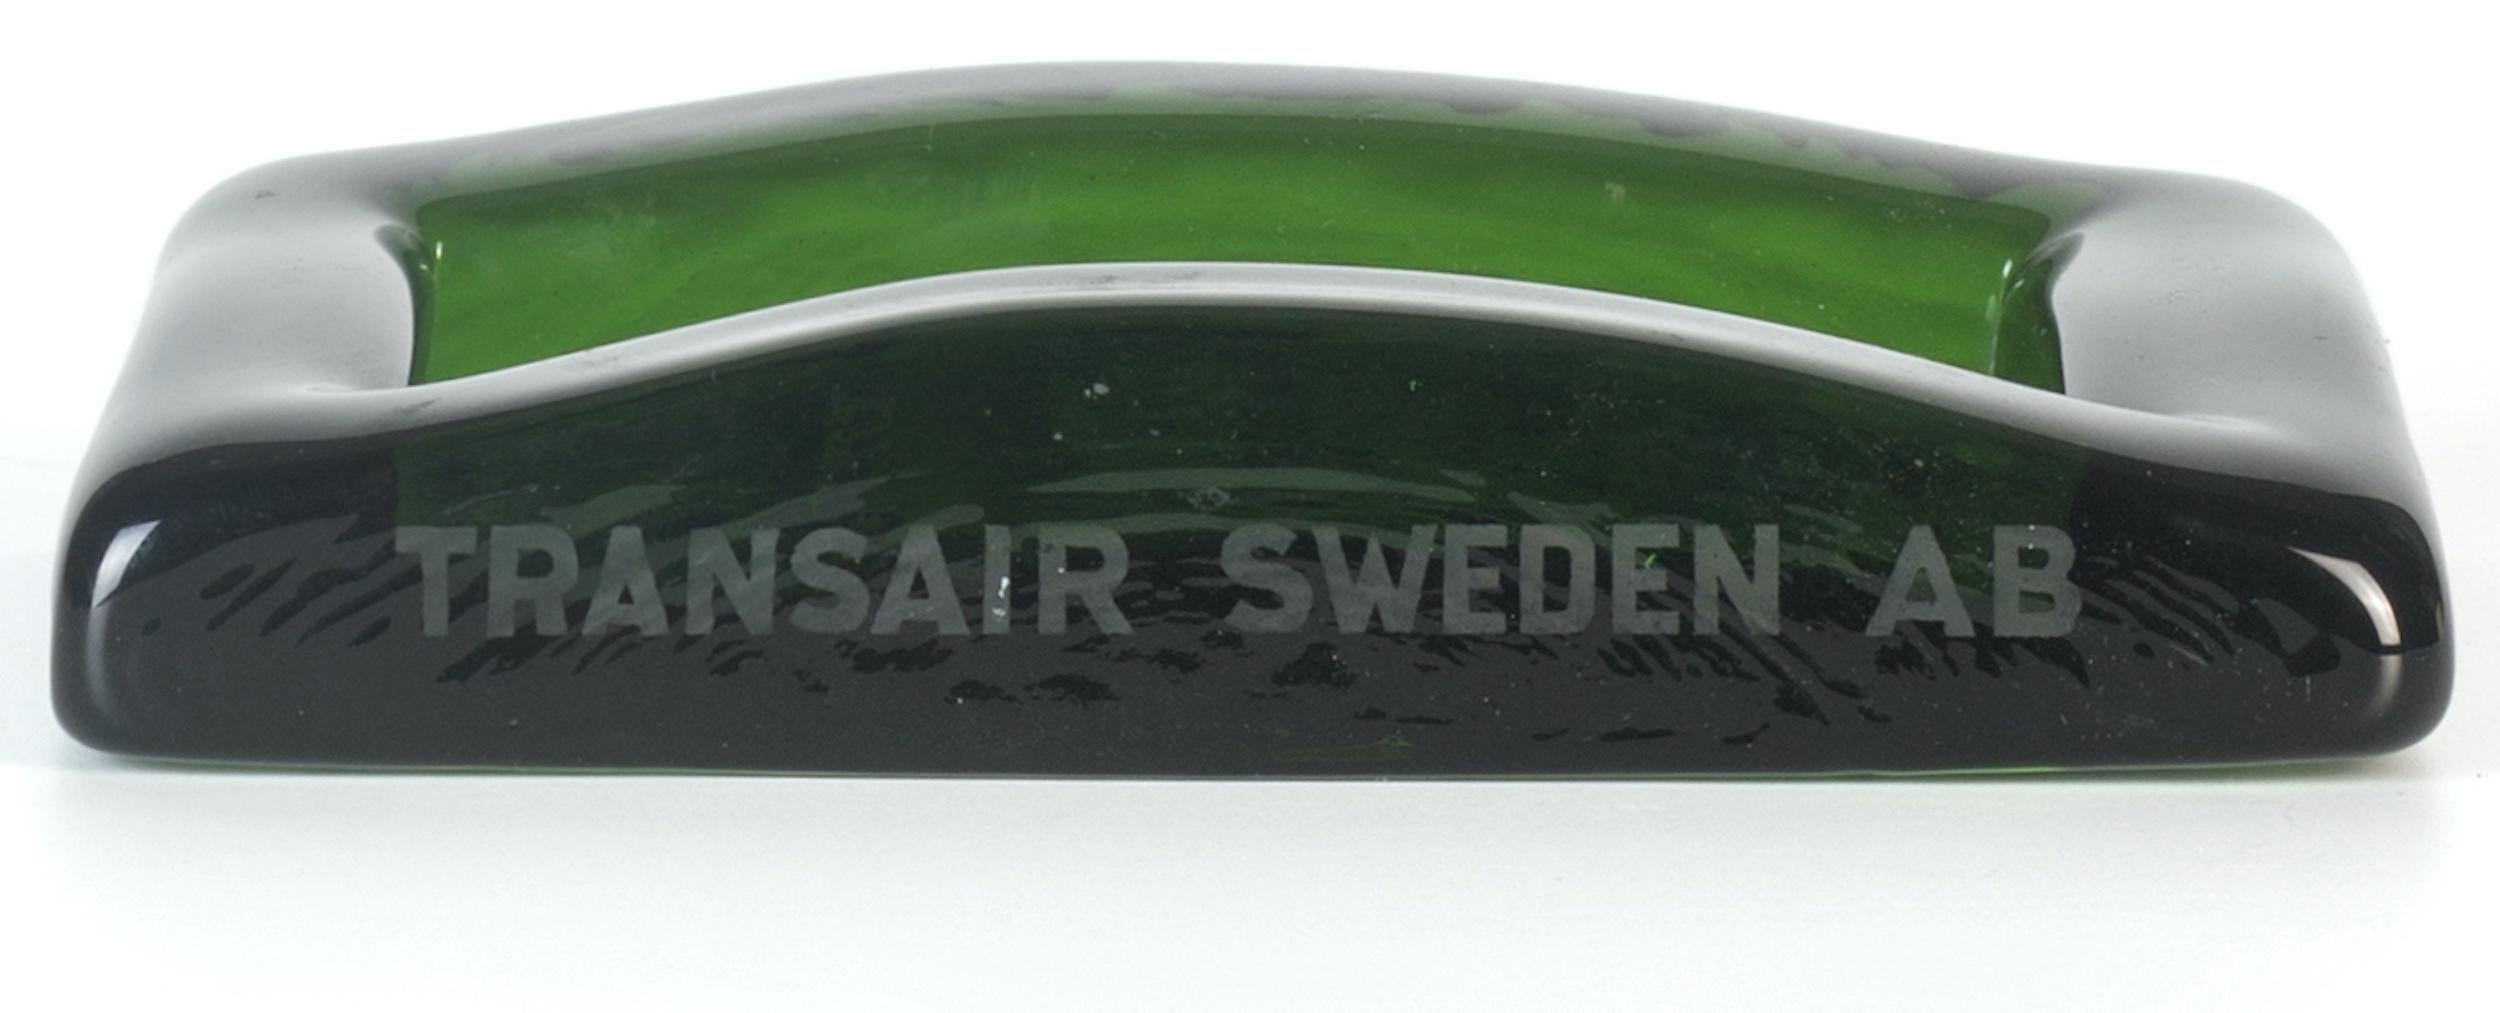 Transair Sweden AB ashtray is a wonderful glass decorative object, realized during the 1970s. 

Very fashionable green colored ashtray. This ashtray was produced by Transair Sweden AB (as reported on the side).

Transair Sweden AB was a charter